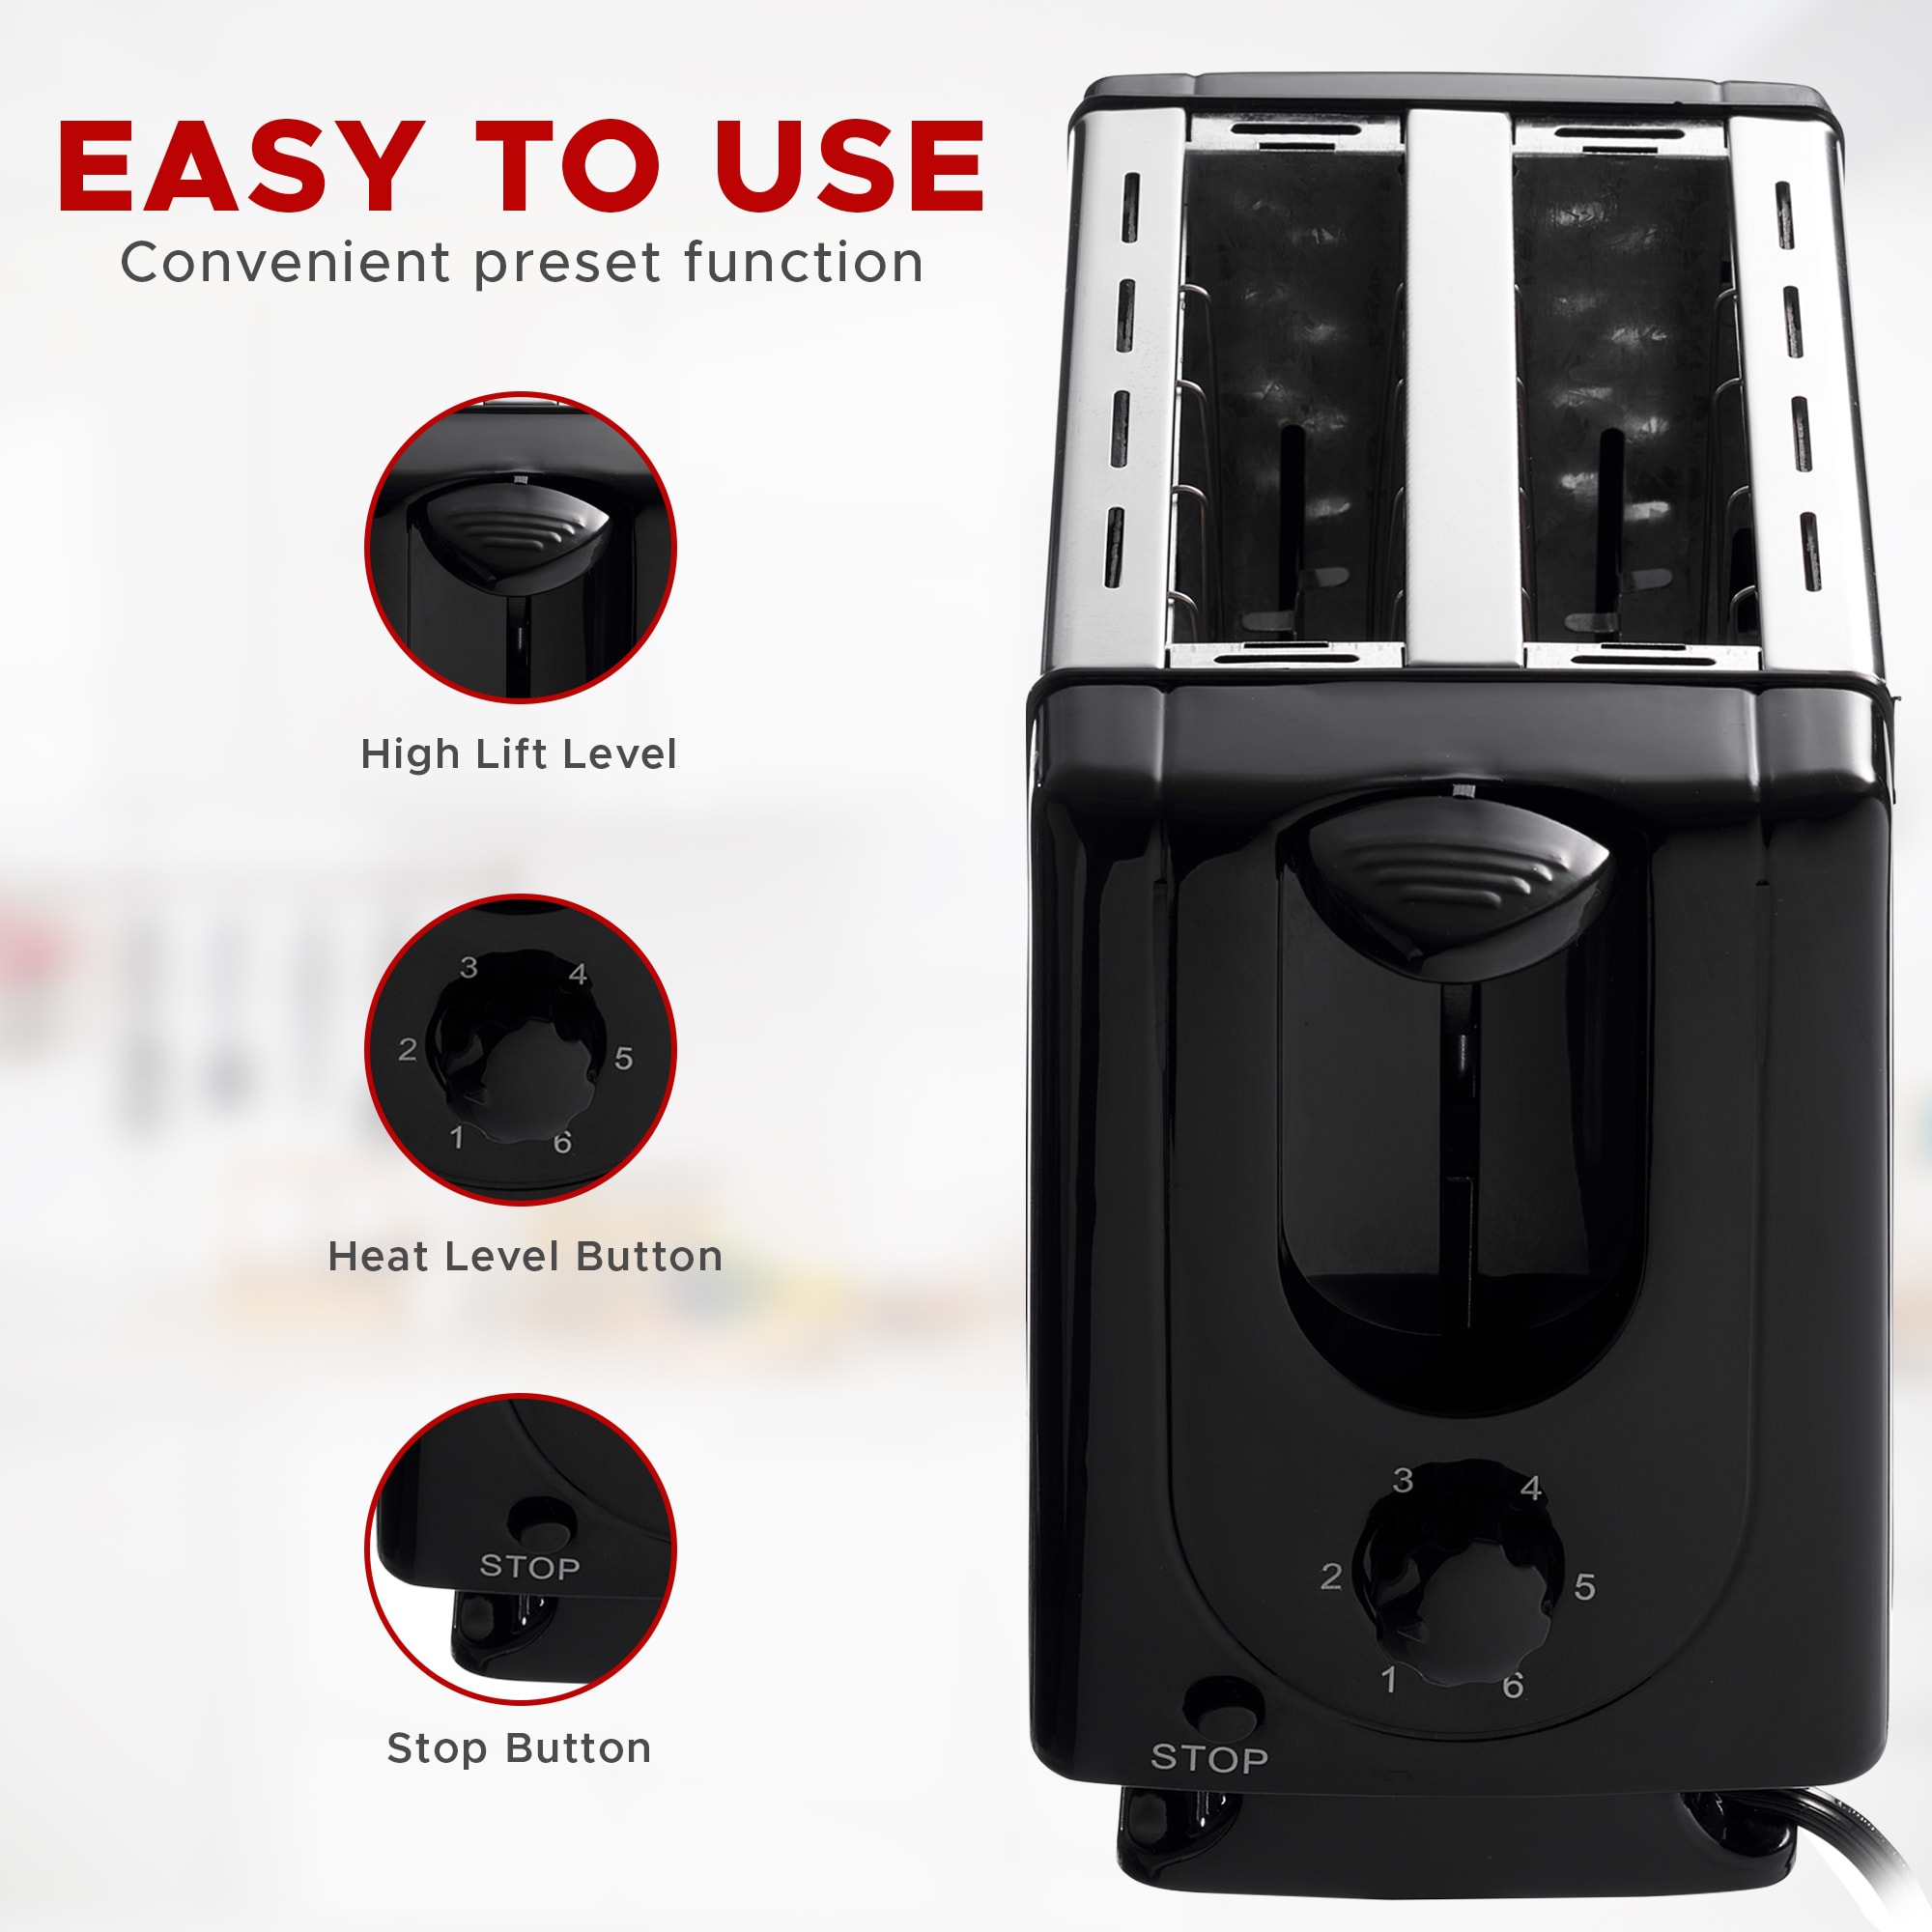 Elevate your holiday gatherings with the two-zone Midea air fryer